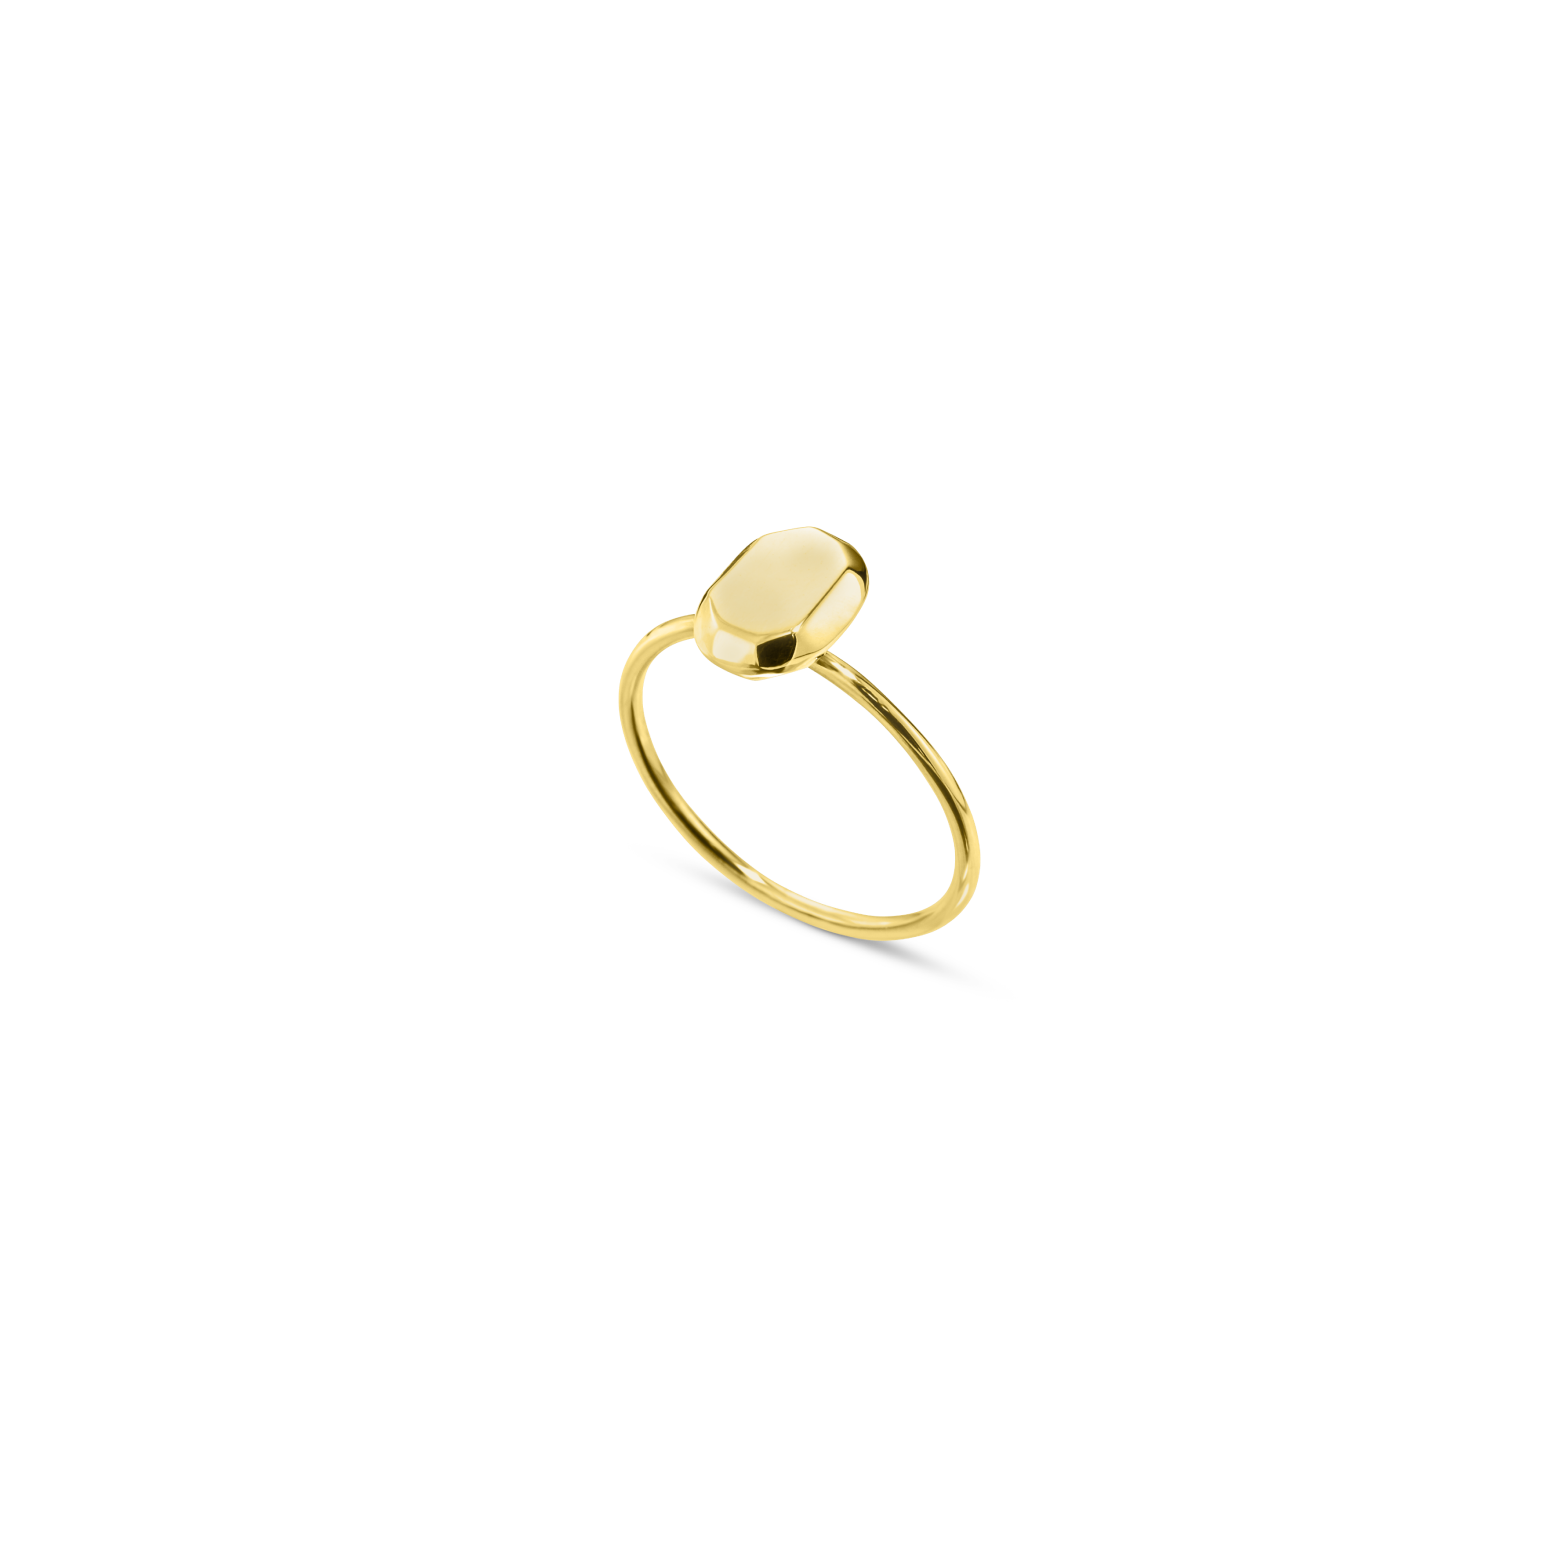 The Mini Oval Ring